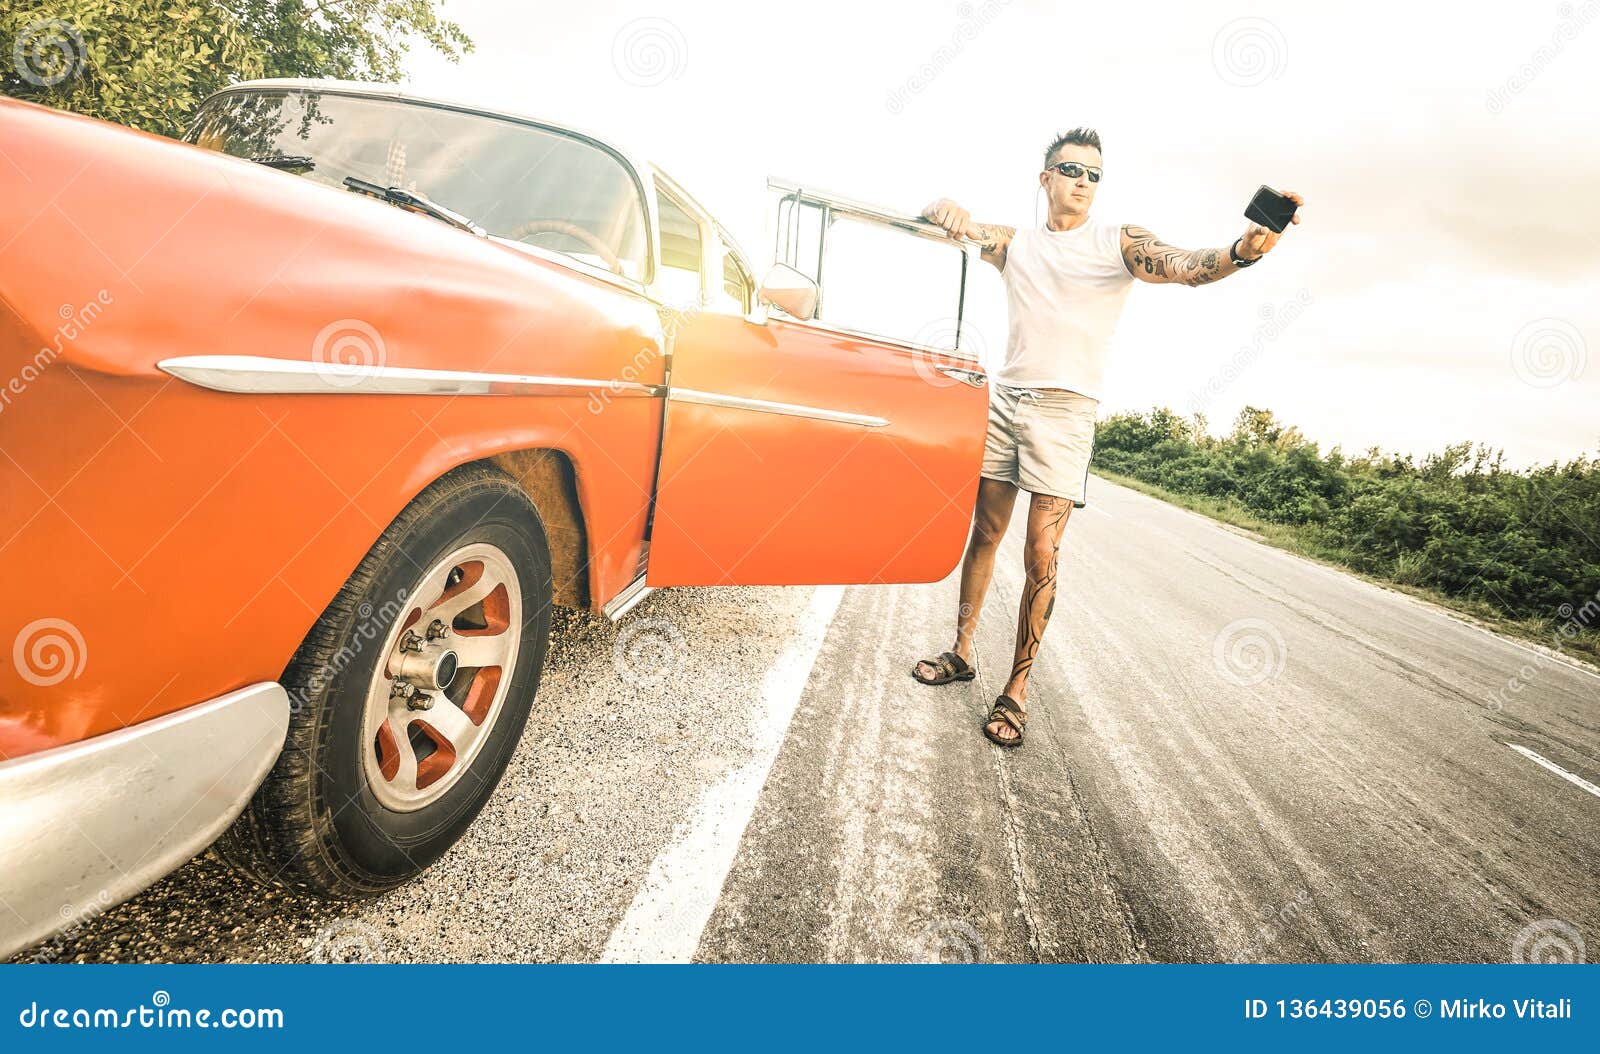 young hipster fashion man with tattoo taking selfie with vintage car during road trip in cuba - travel wanderlust concept